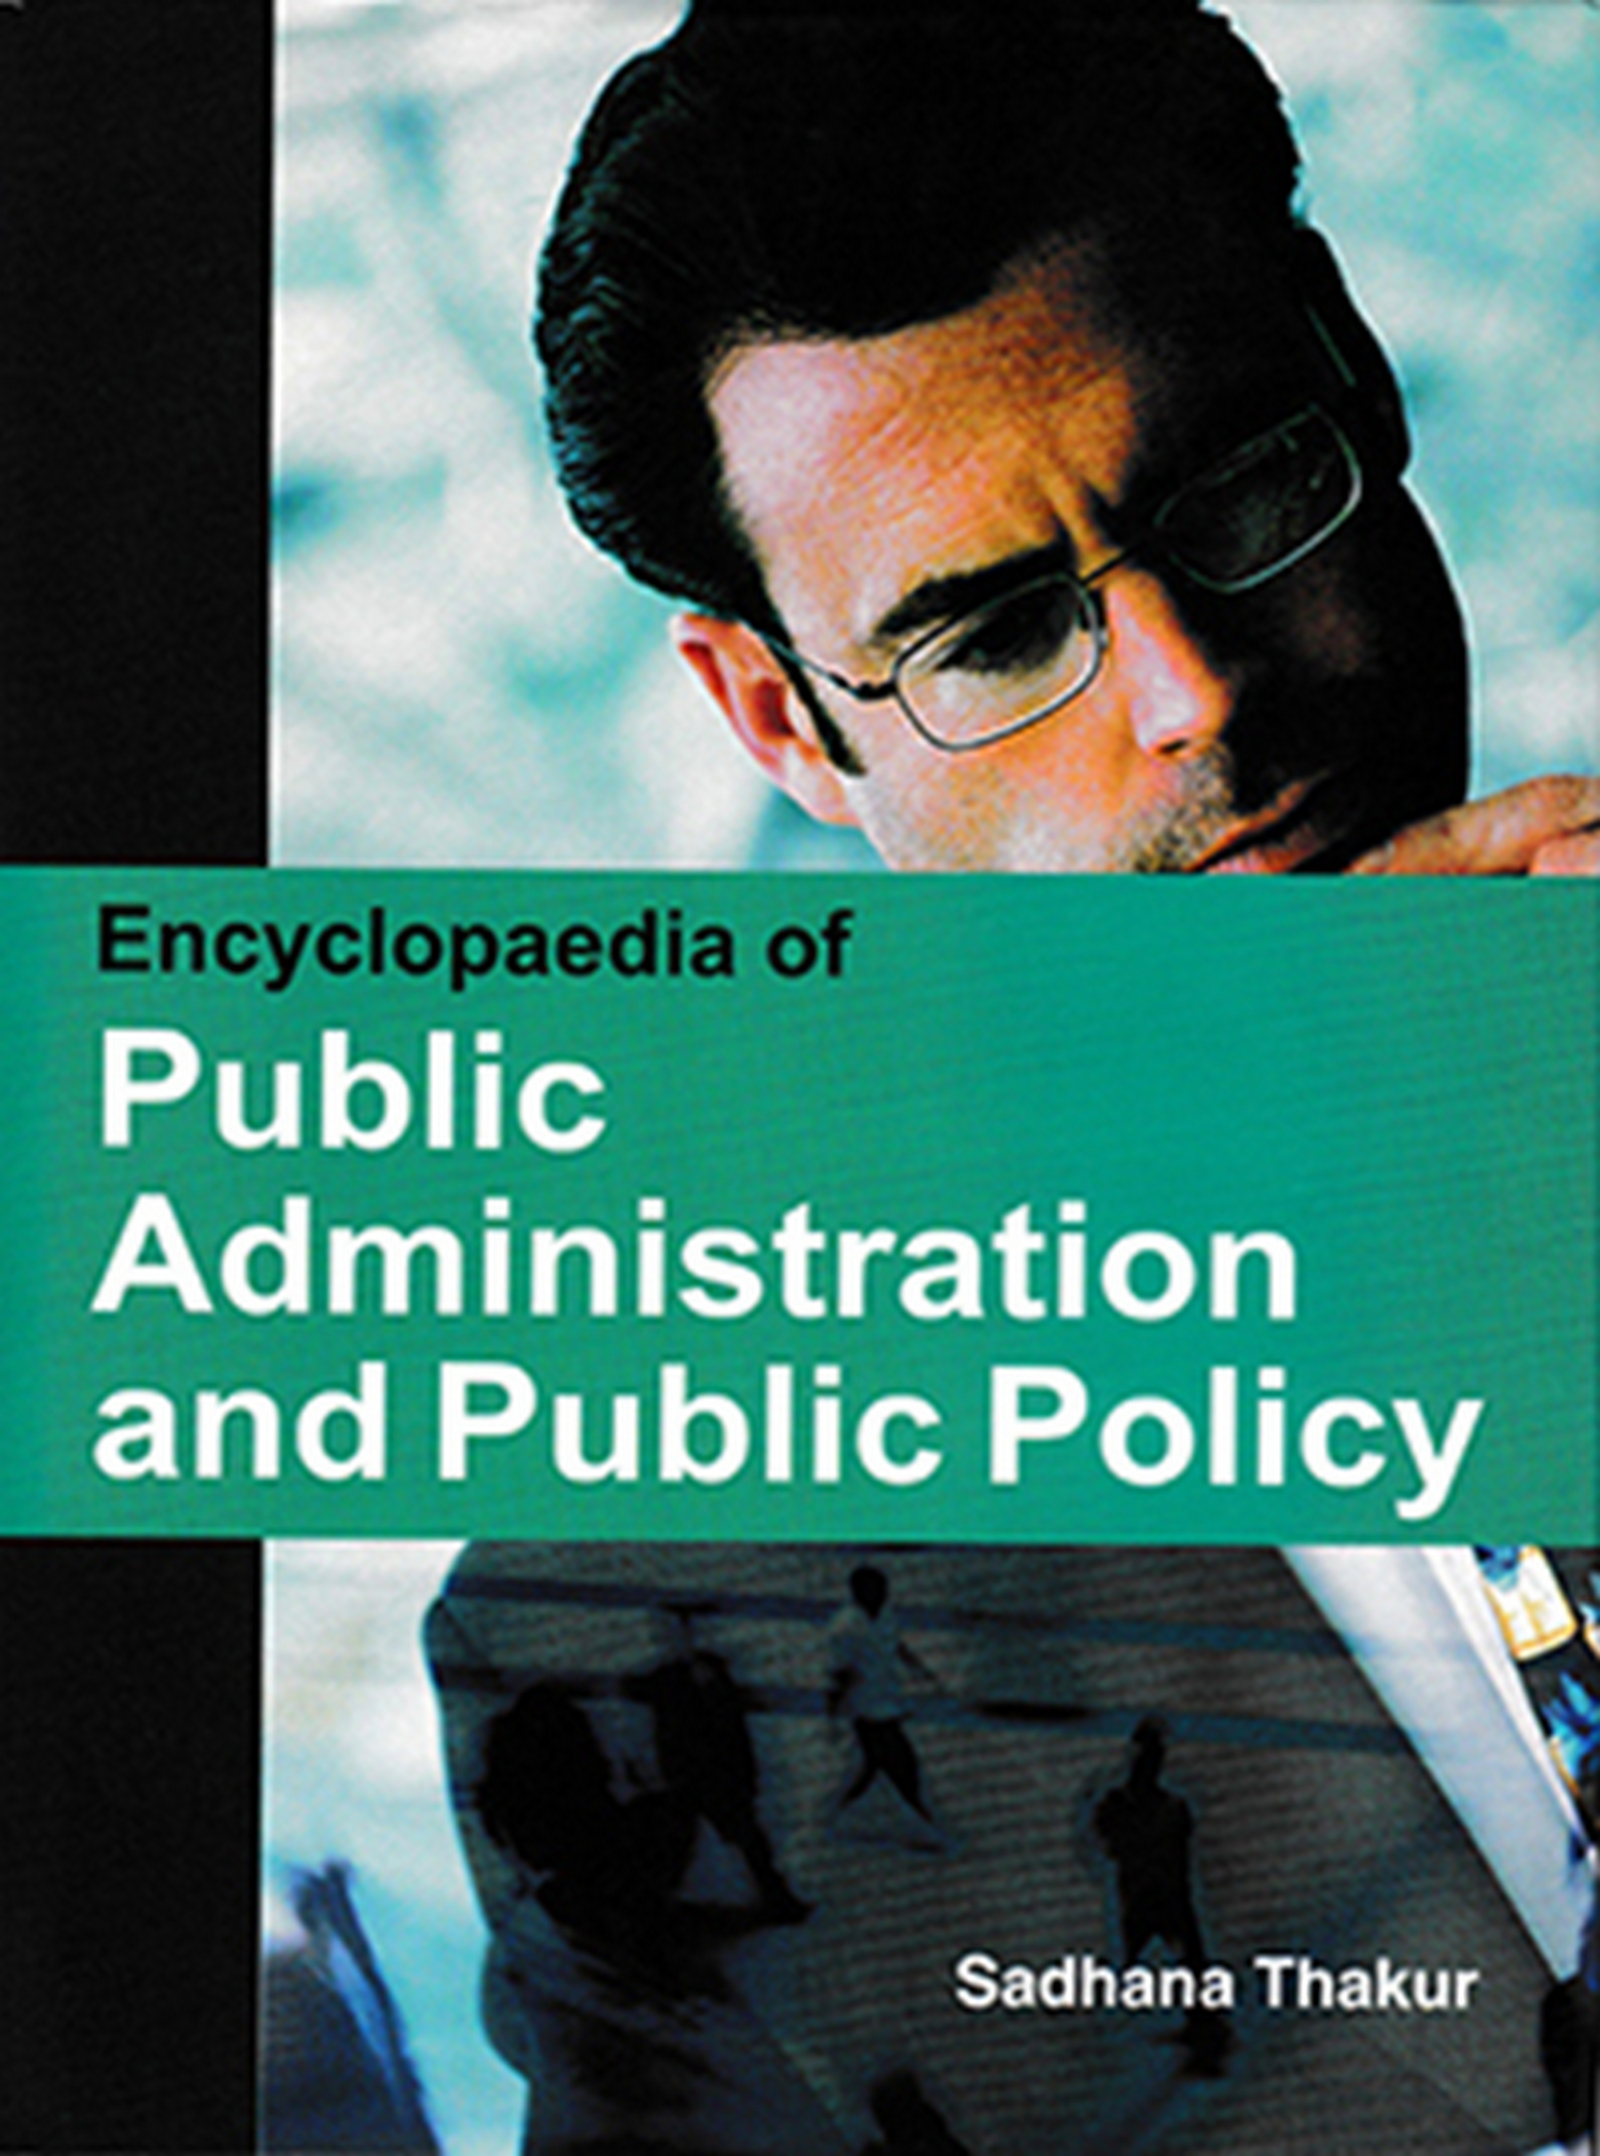 Encyclopaedia of Public Administration and Public Policy Volume-9